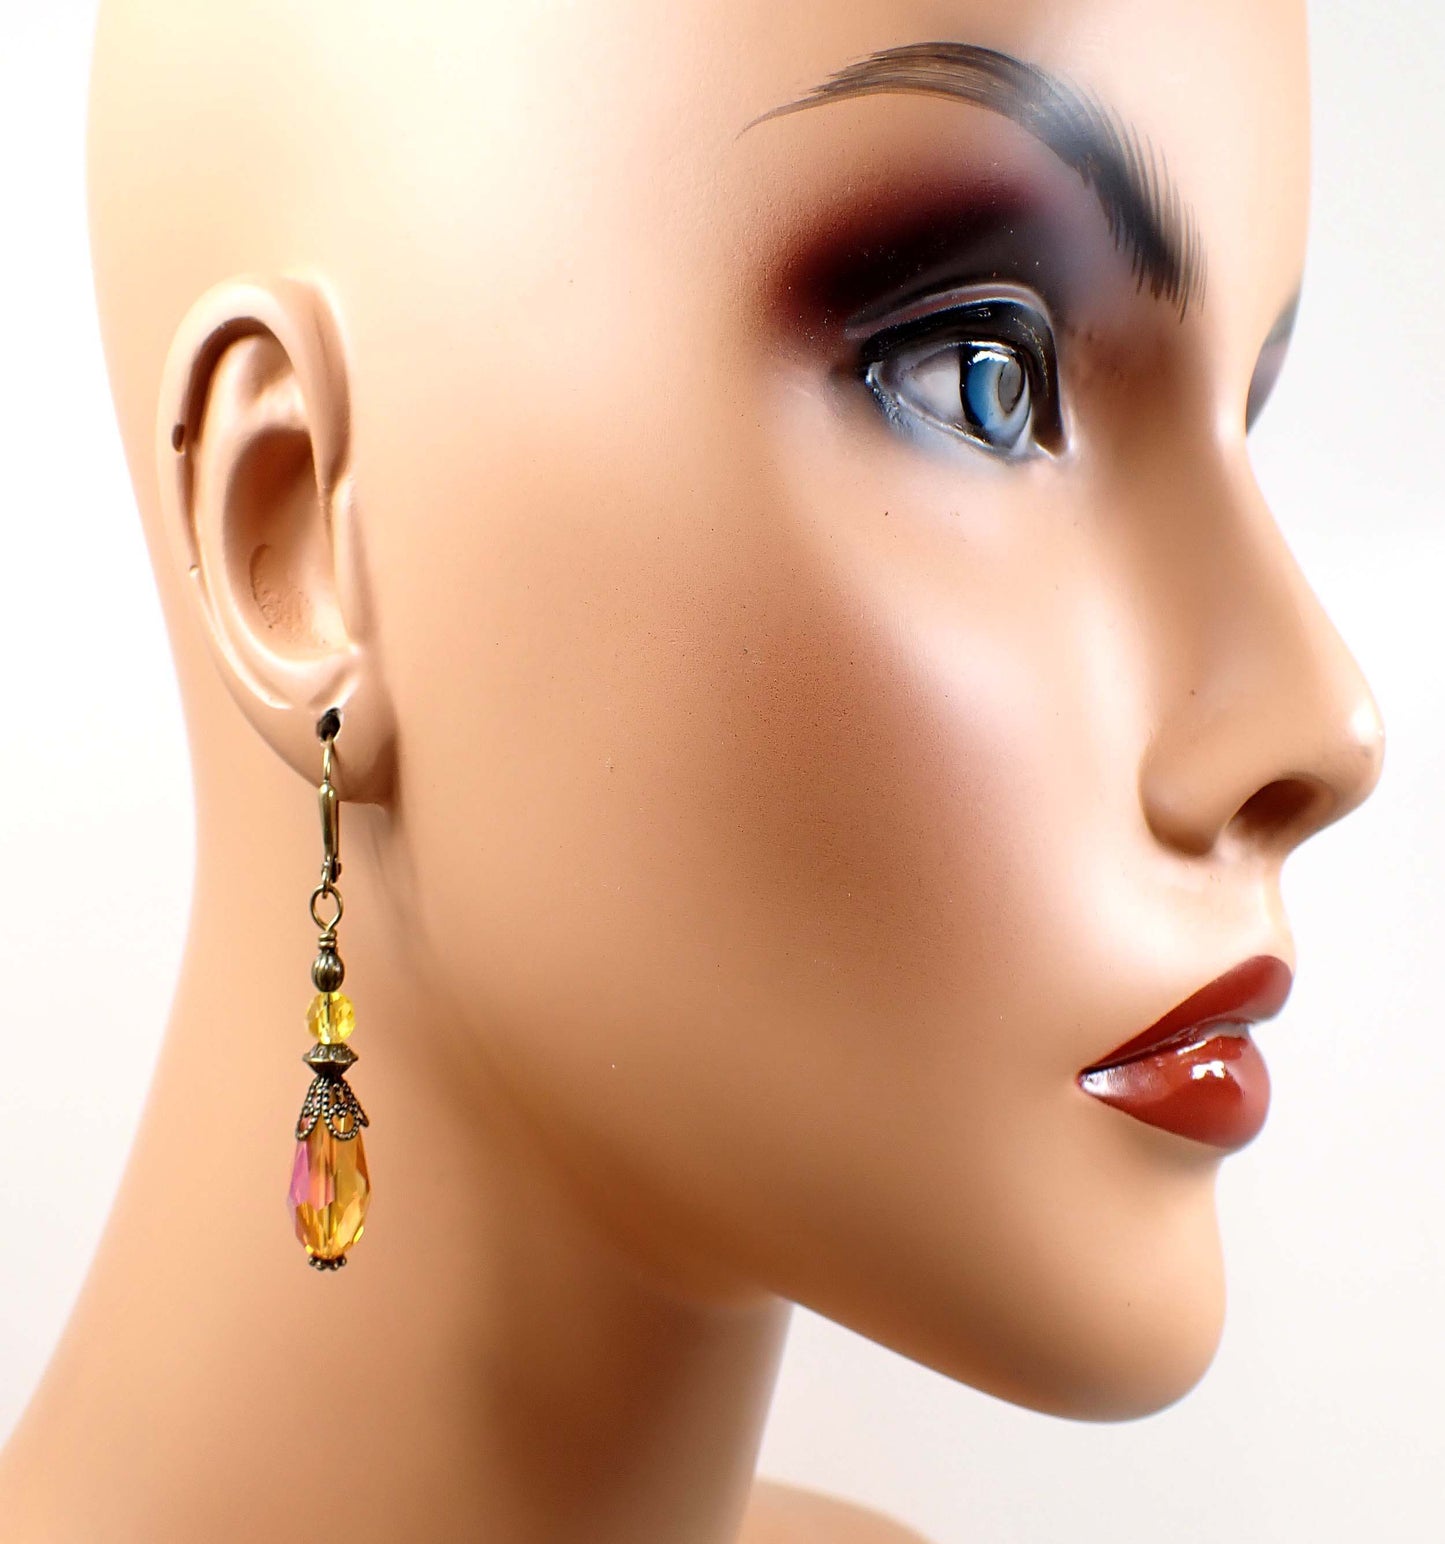 Handmade Vintage Style Pink Orange Yellow Teardrop Earrings with Antiqued Brass Hook Lever Back or Clip On